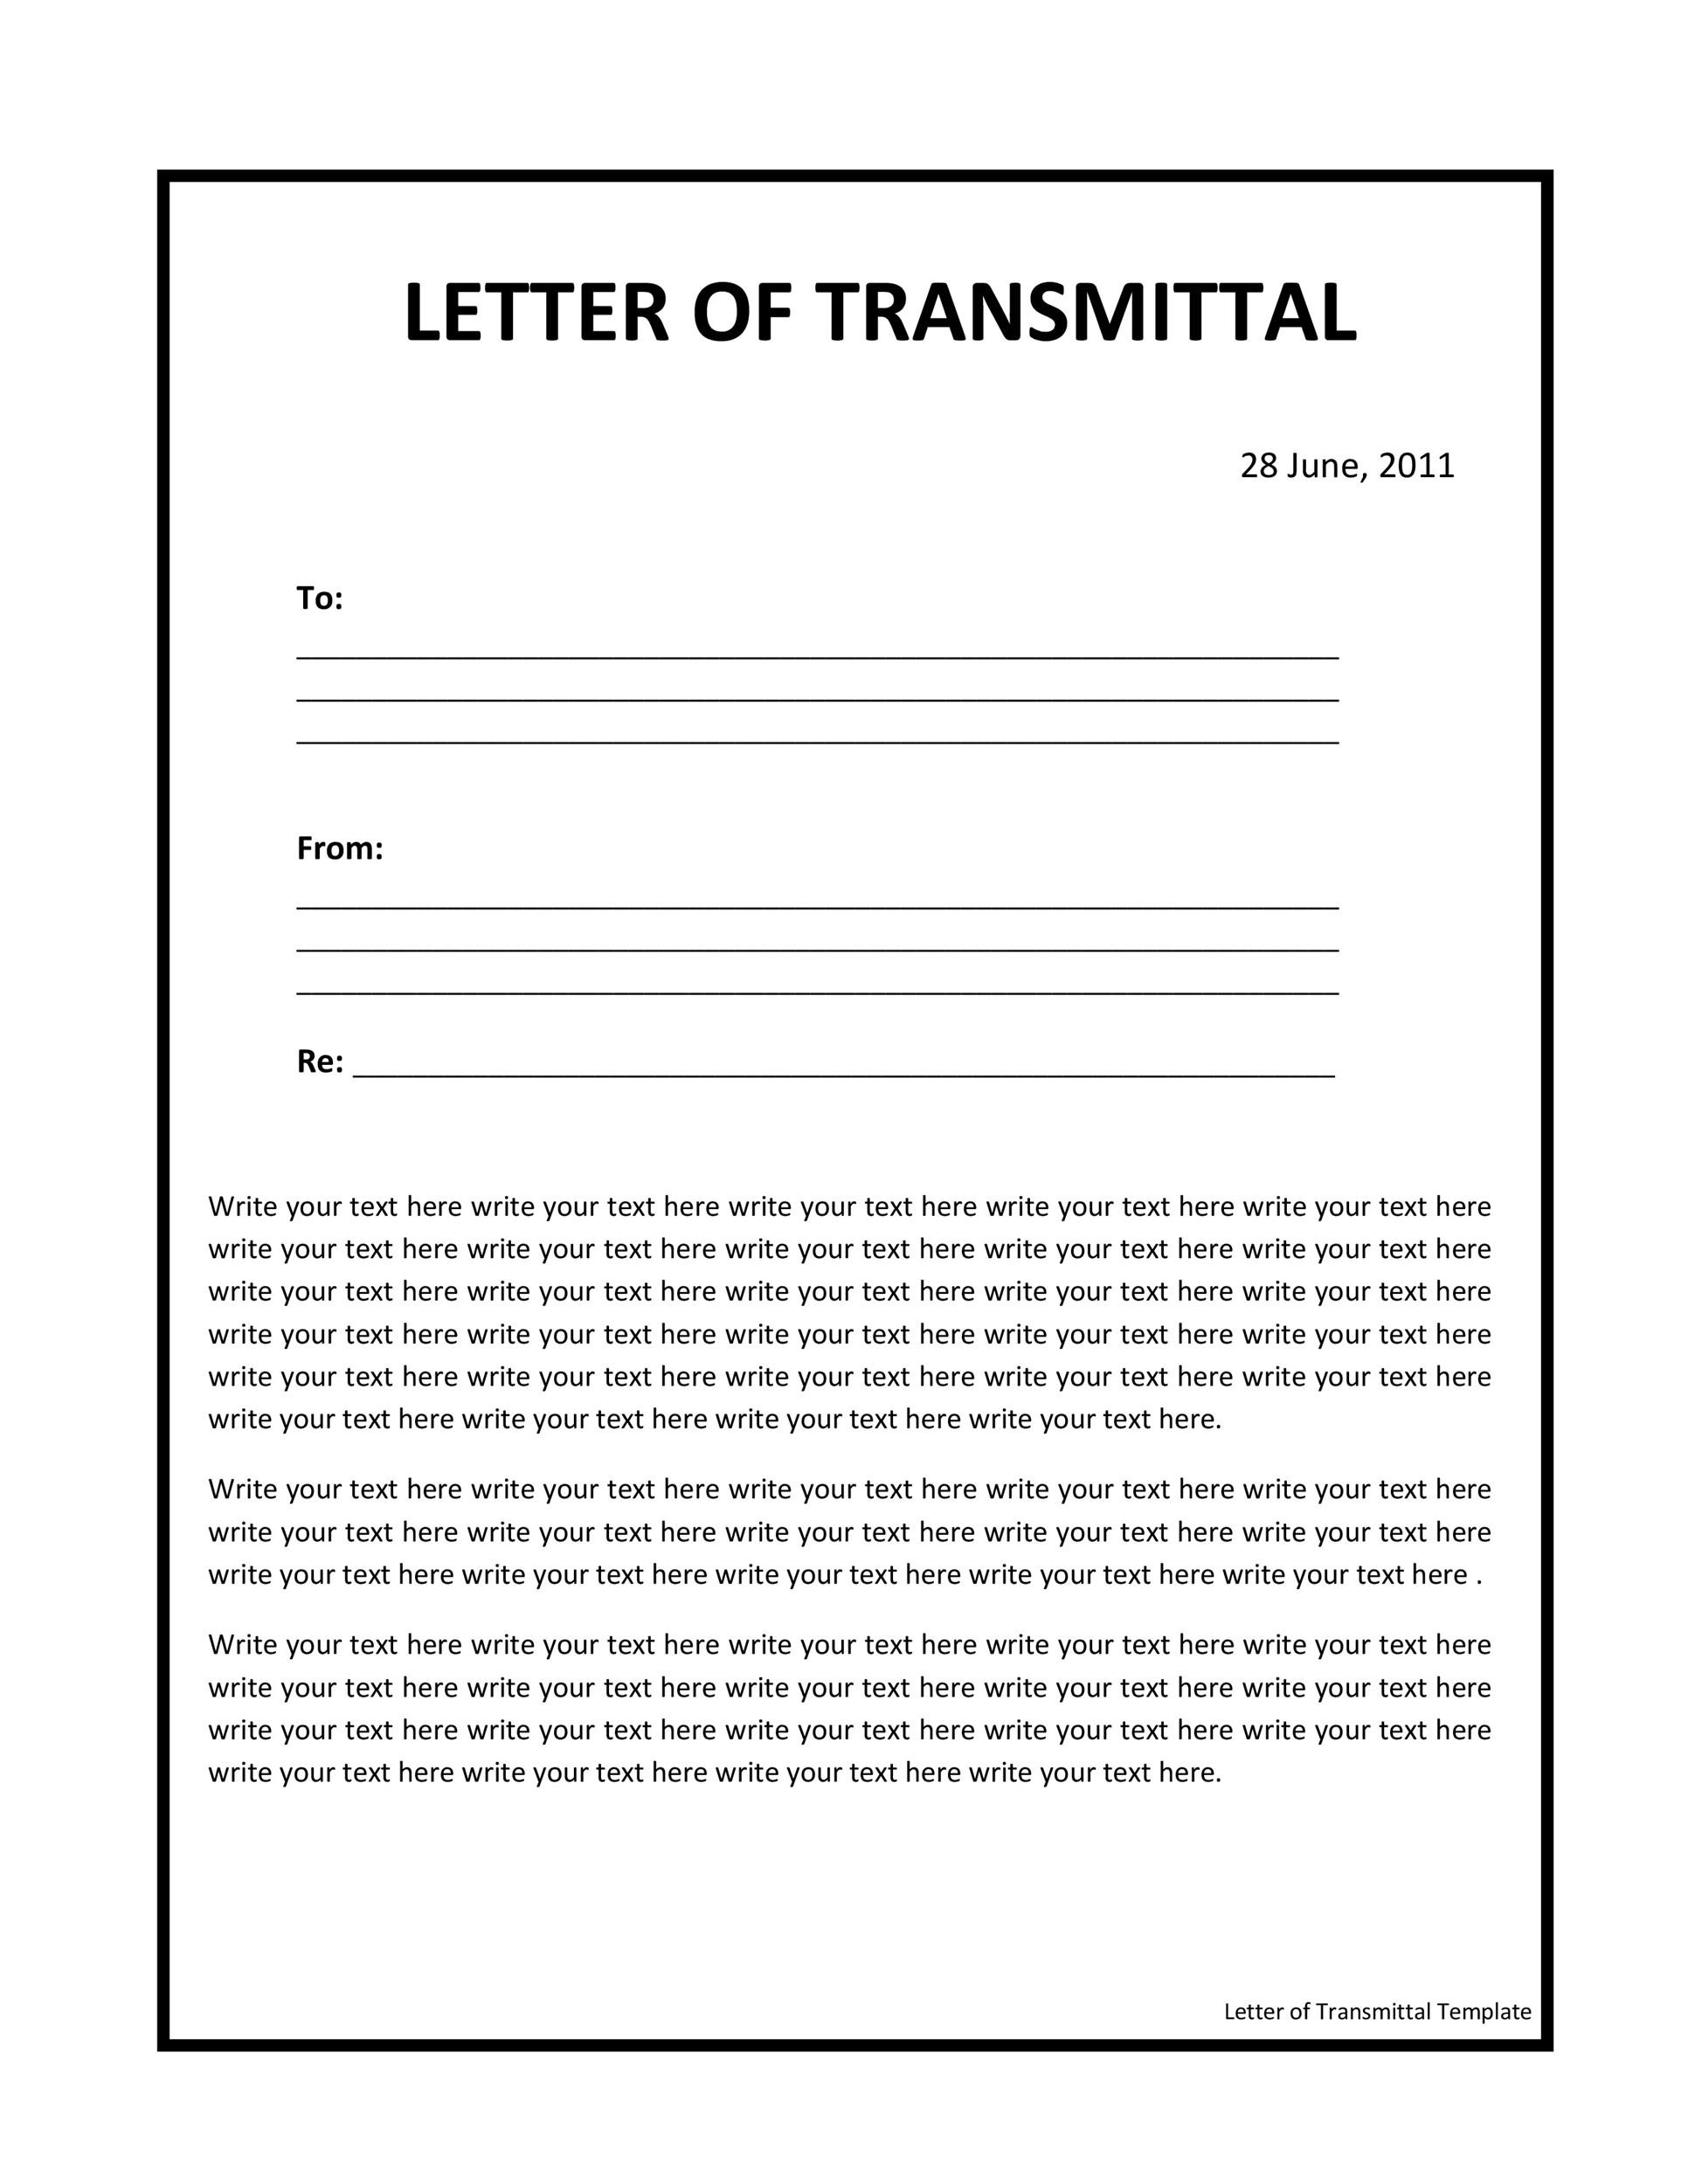 Free letter of transmittal template 04